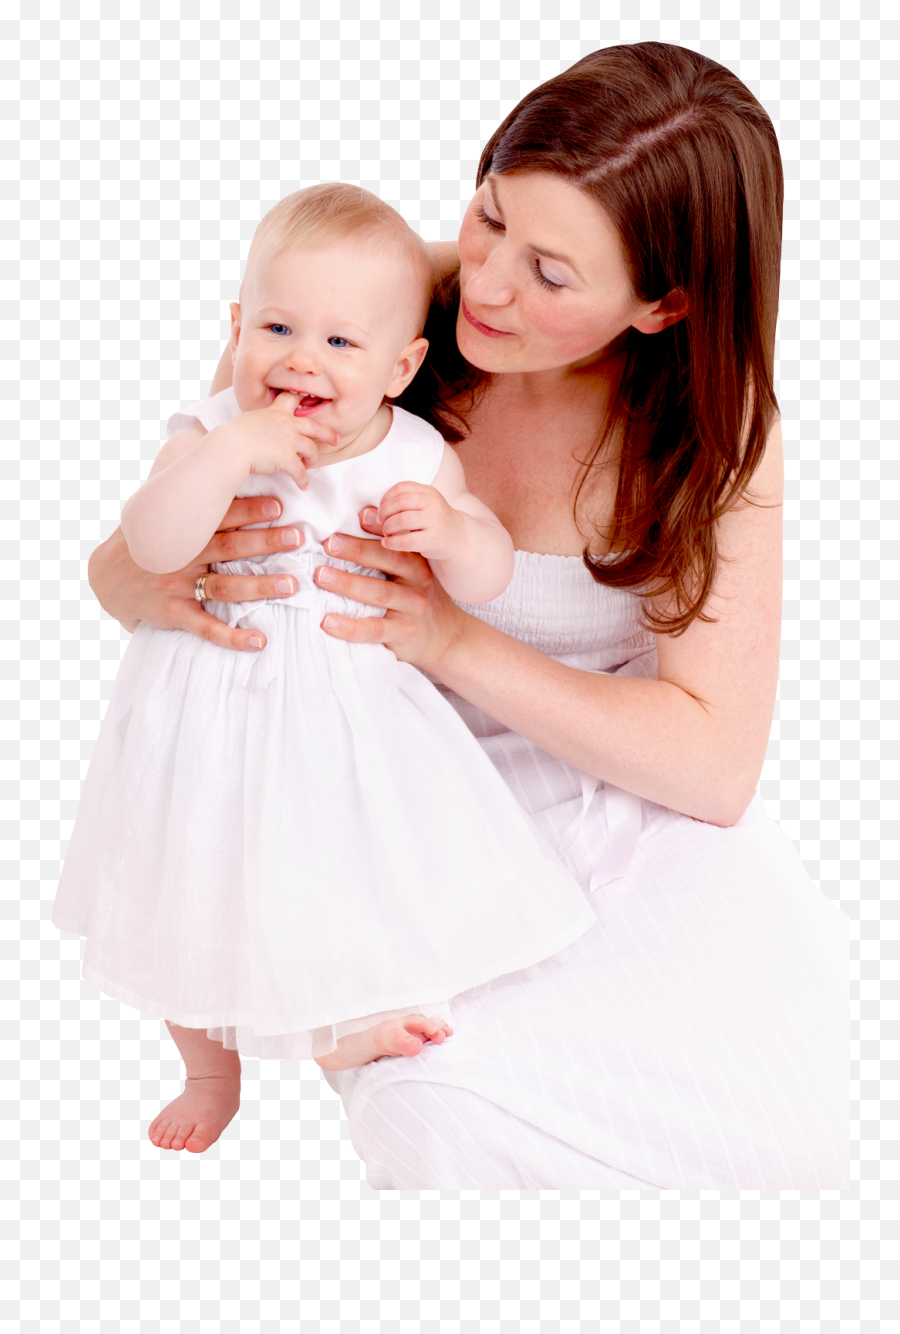 Mom With Baby Png Image - Pngpix Child And Mother Png Emoji,Baby Png